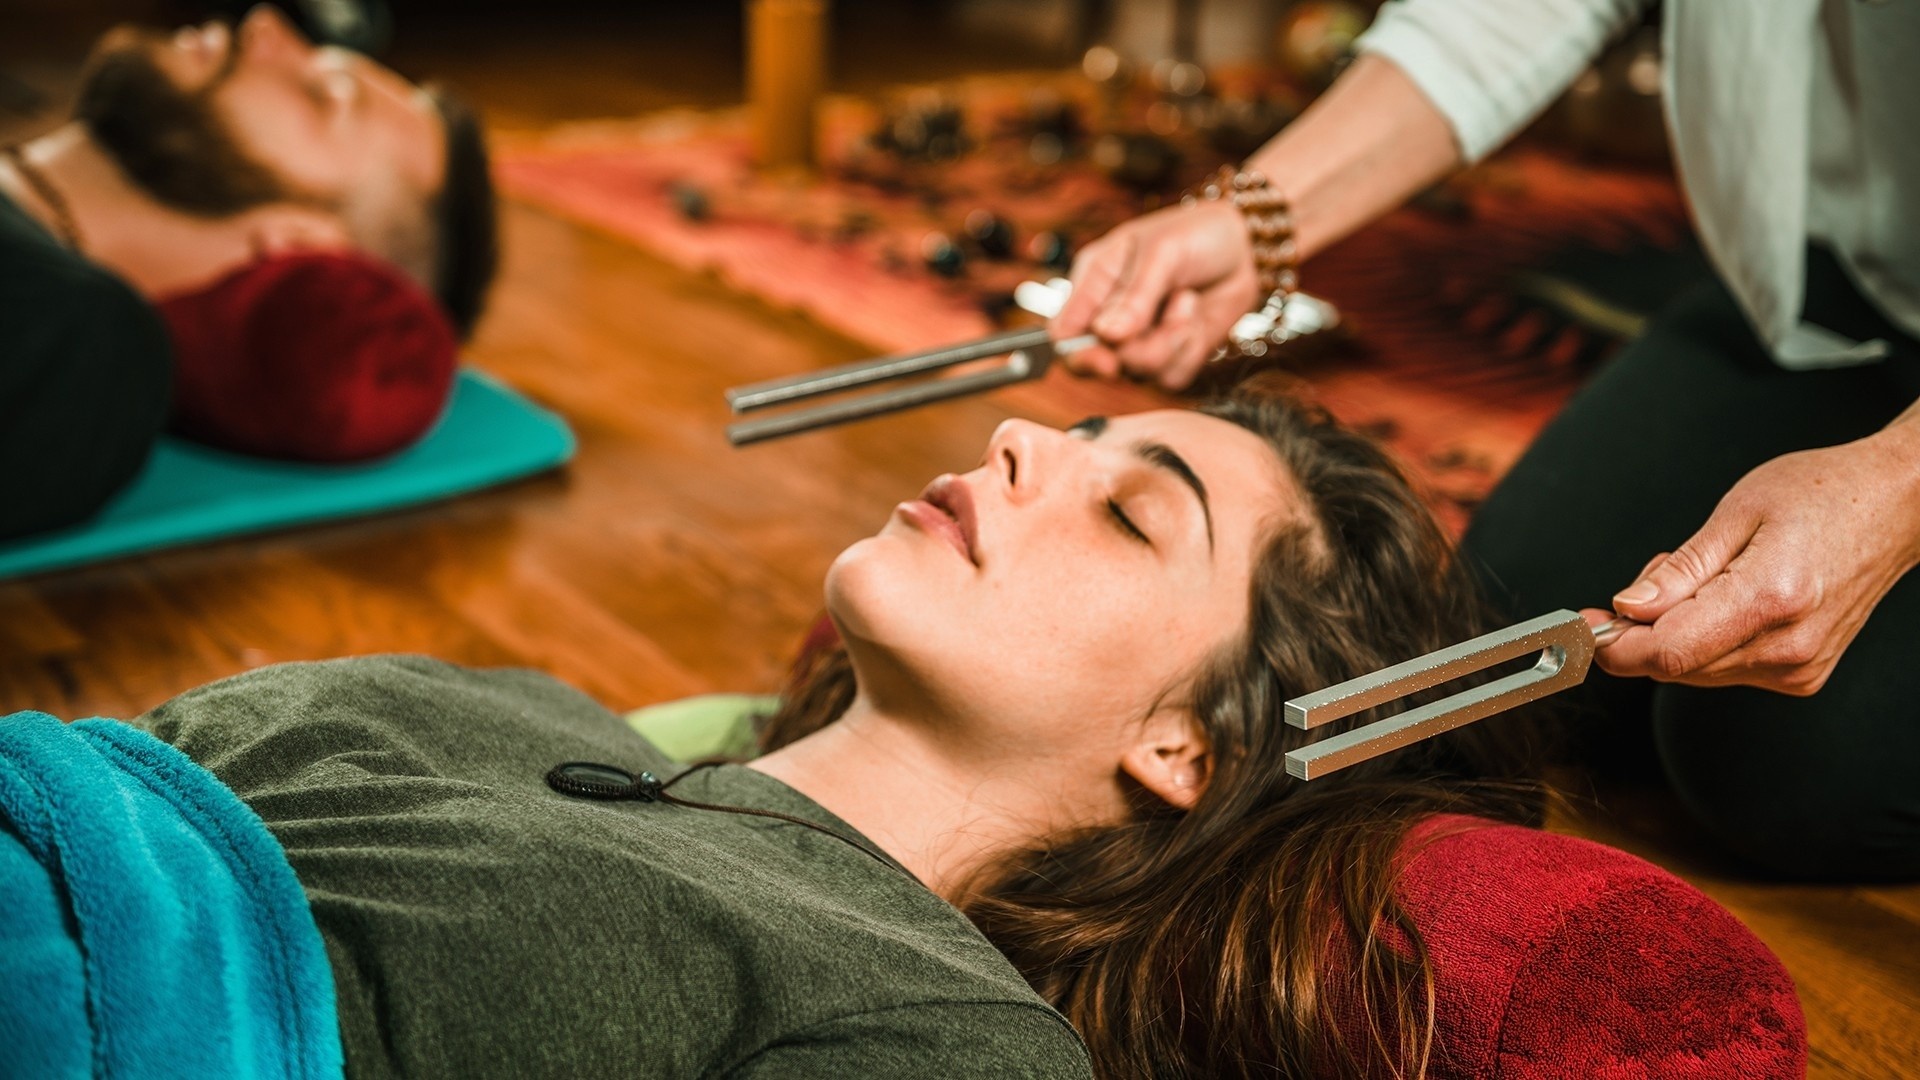 STIRLINGSHIRE, SCOTLAND - Sound Healing with Tuning Forks